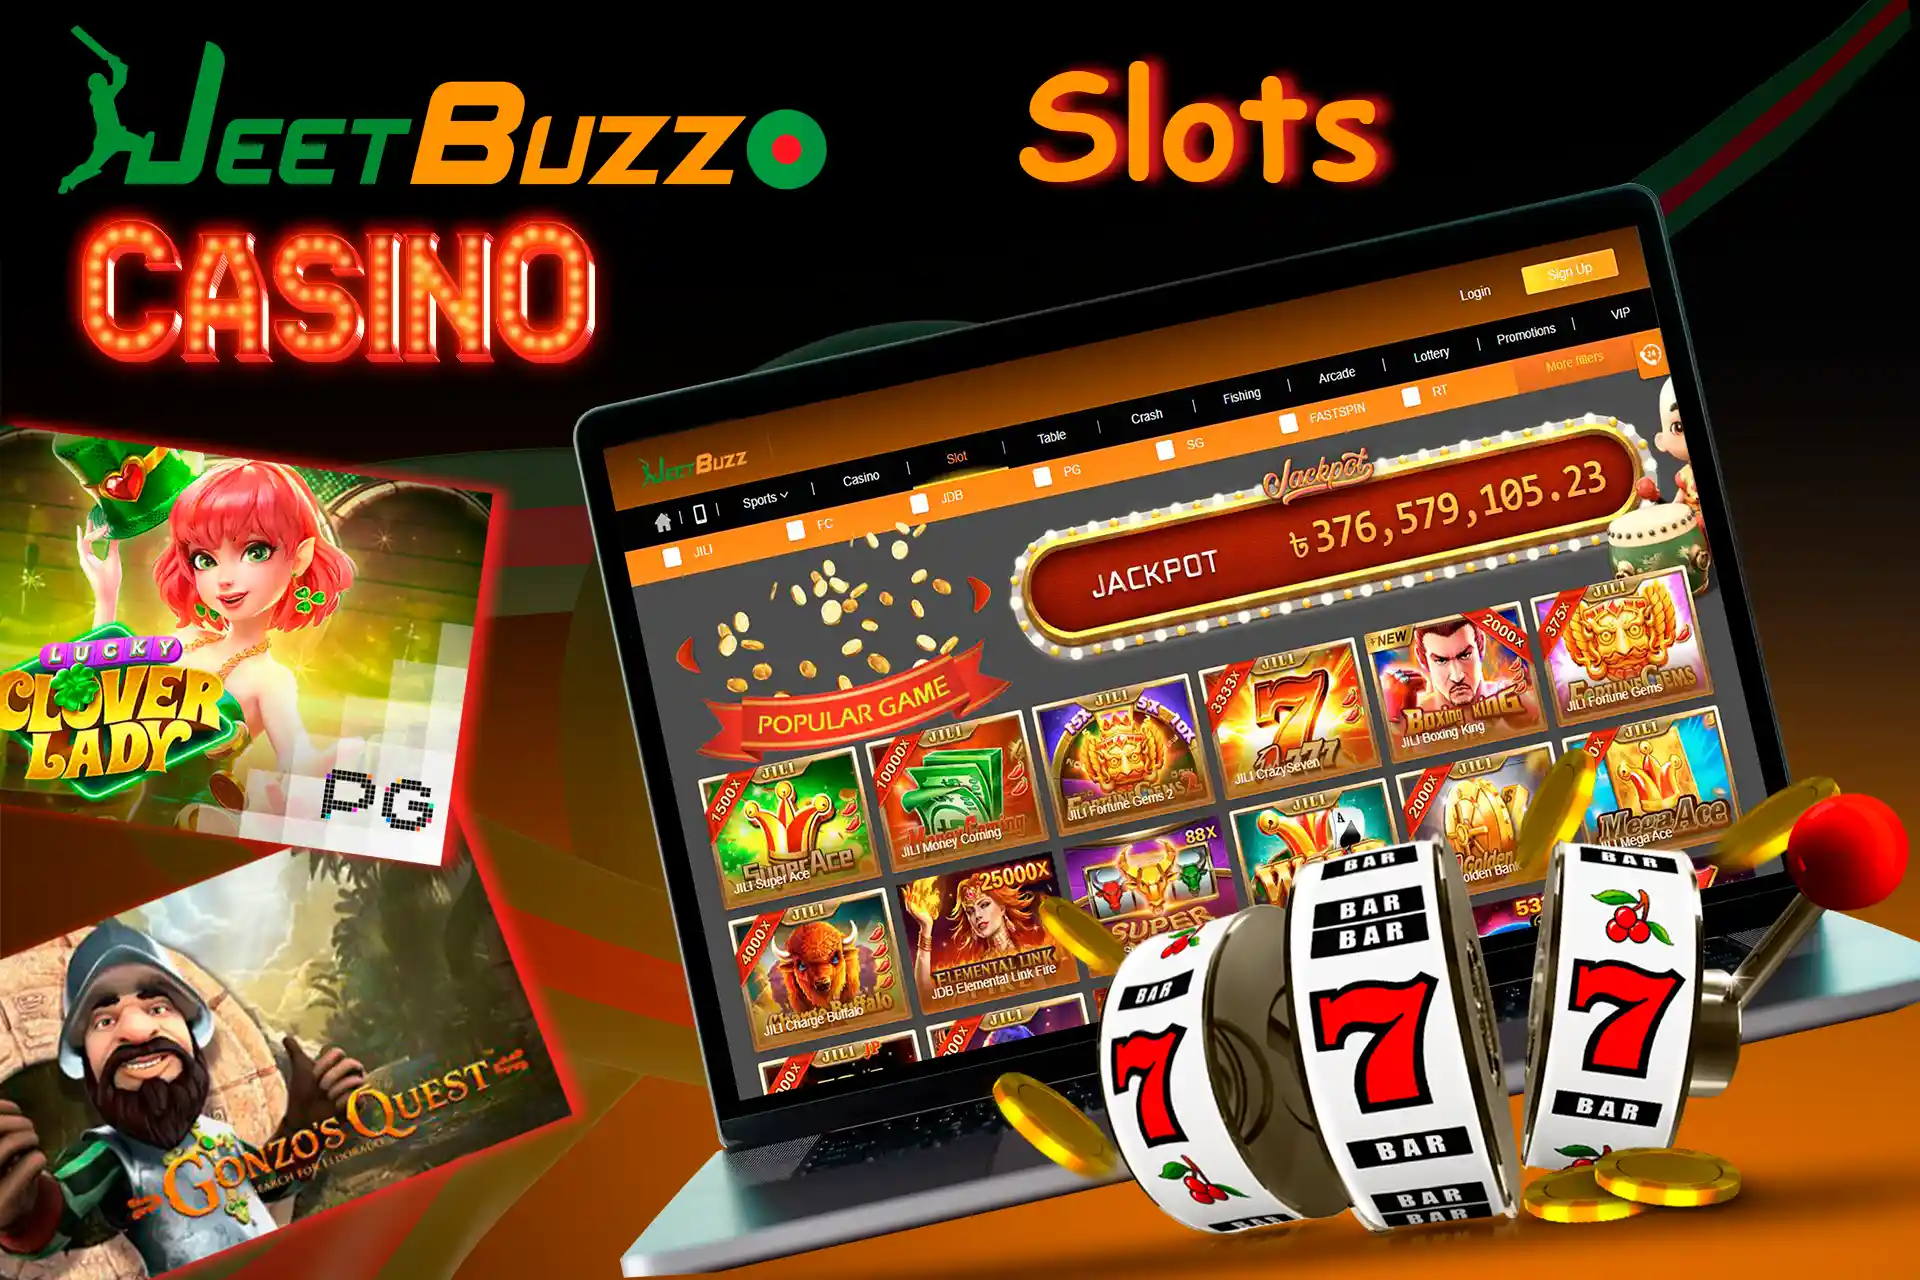 JeetBuzz bookmaker has a variety of games for all users